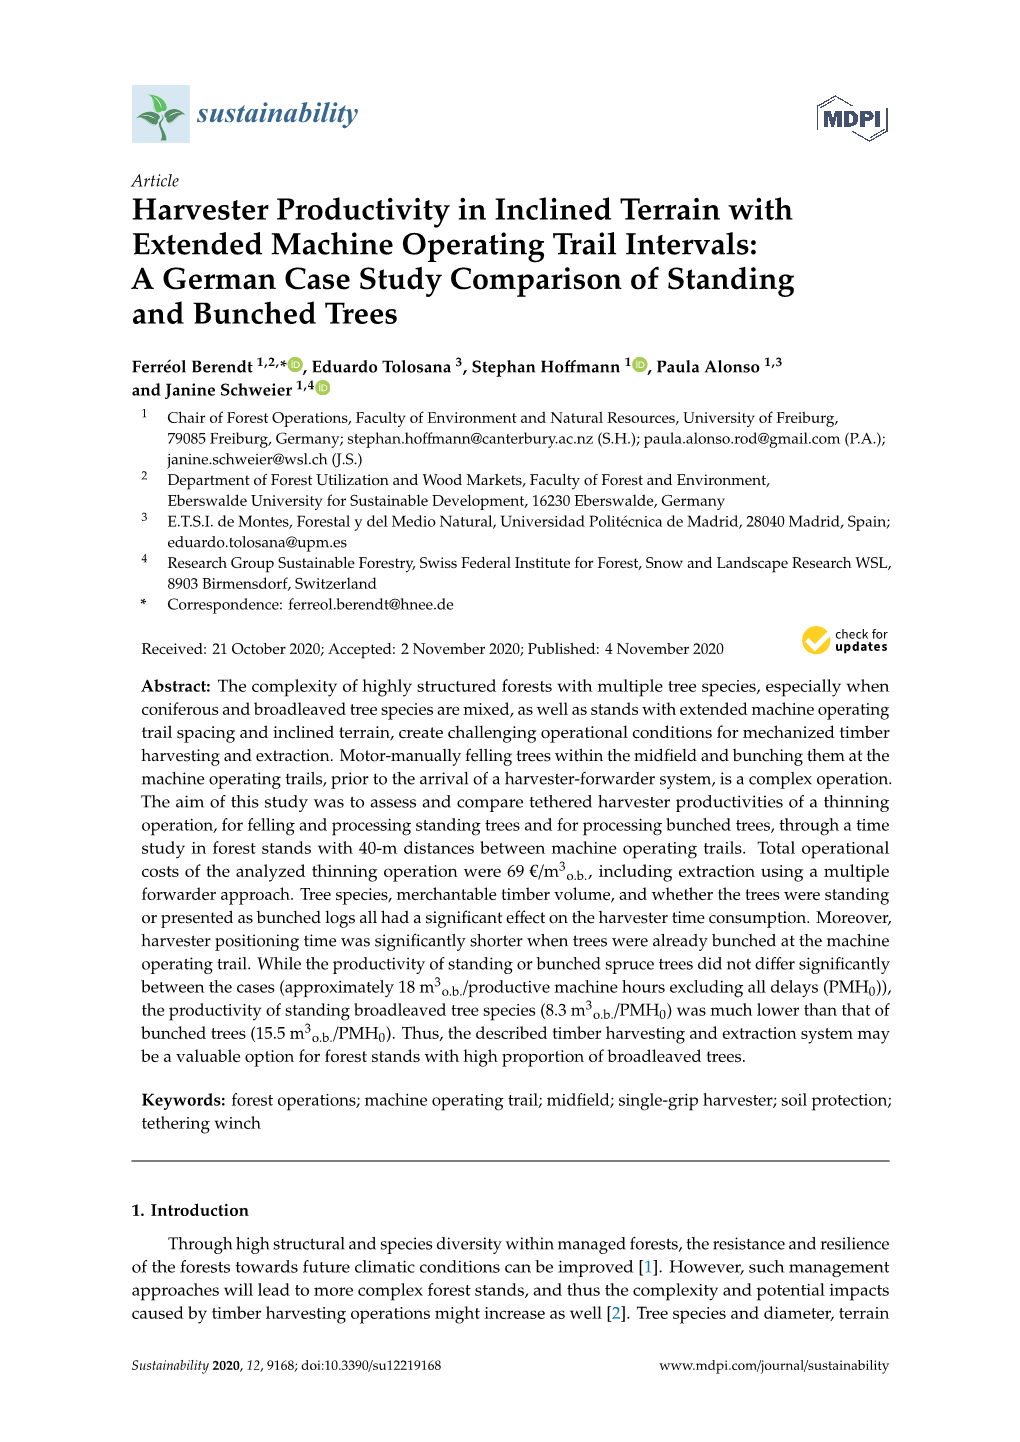 Harvester Productivity in Inclined Terrain with Extended Machine Operating Trail Intervals: a German Case Study Comparison of Standing and Bunched Trees